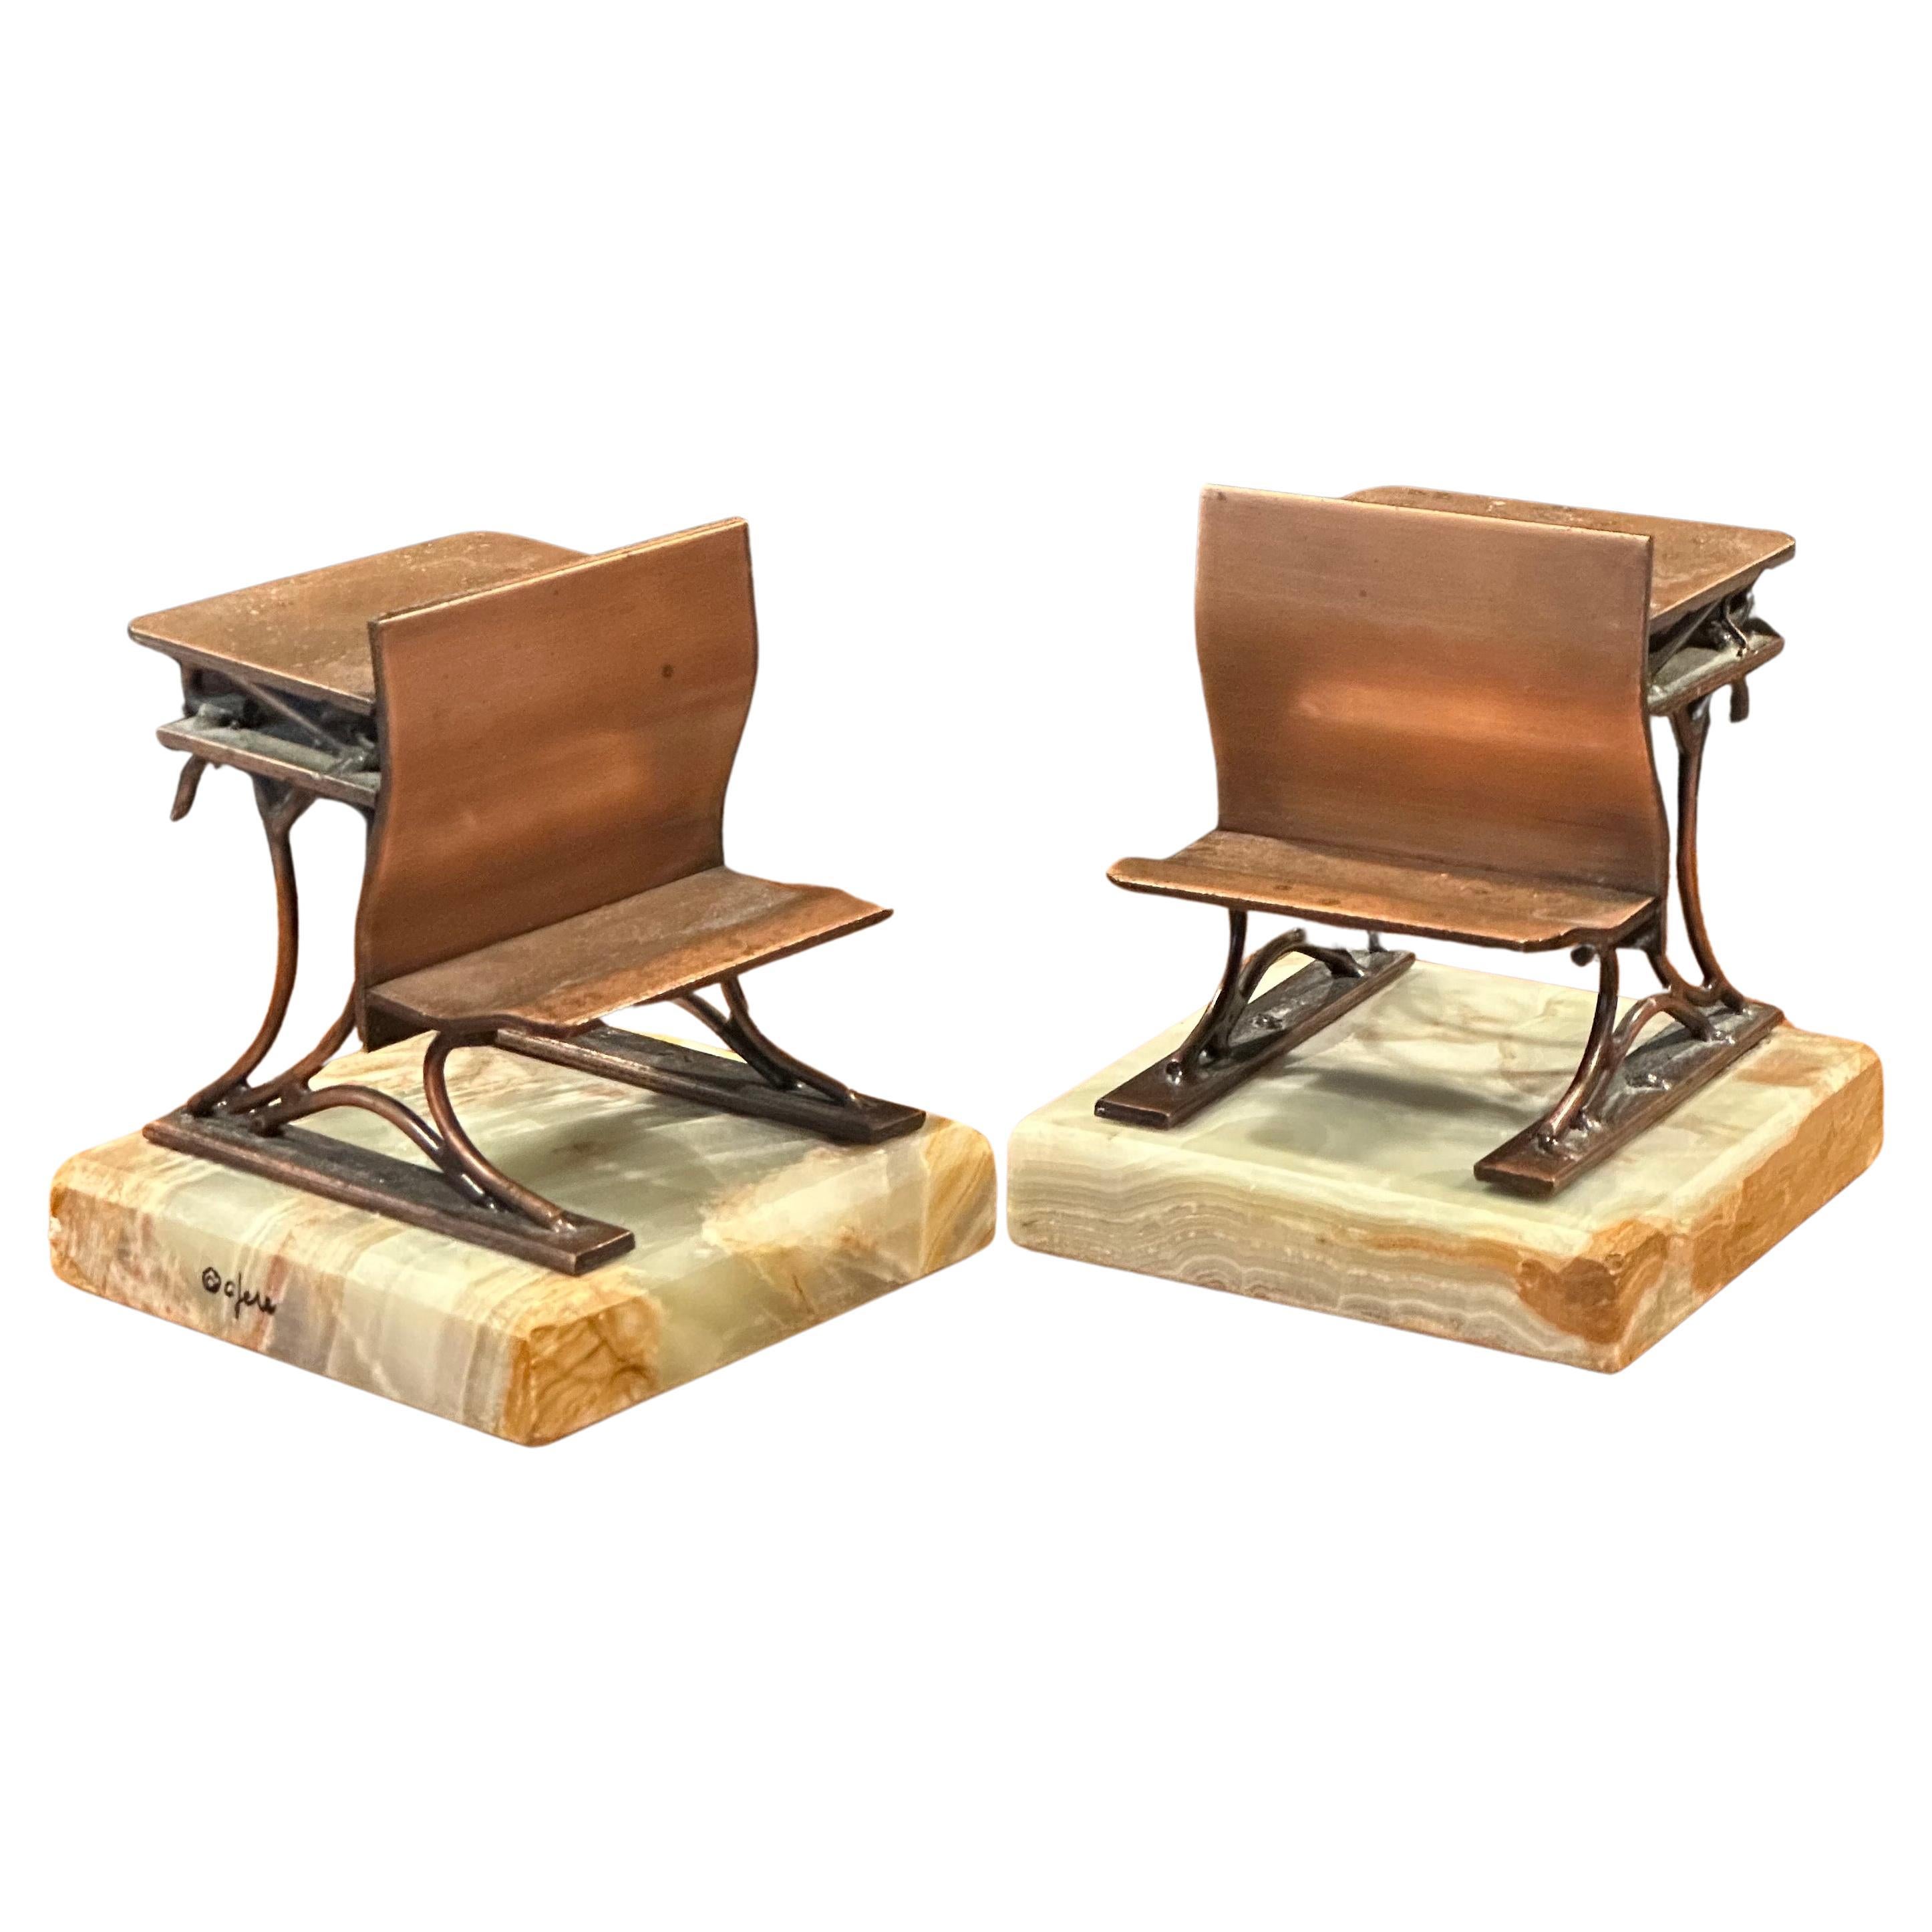 A nice pair of vintage copper school desks on onyx base bookends by Curtis Jeré for Artisan House, circa 1970s. The set is signed on the base and are in very good vintage condition with a wonderful patina. They measure 8